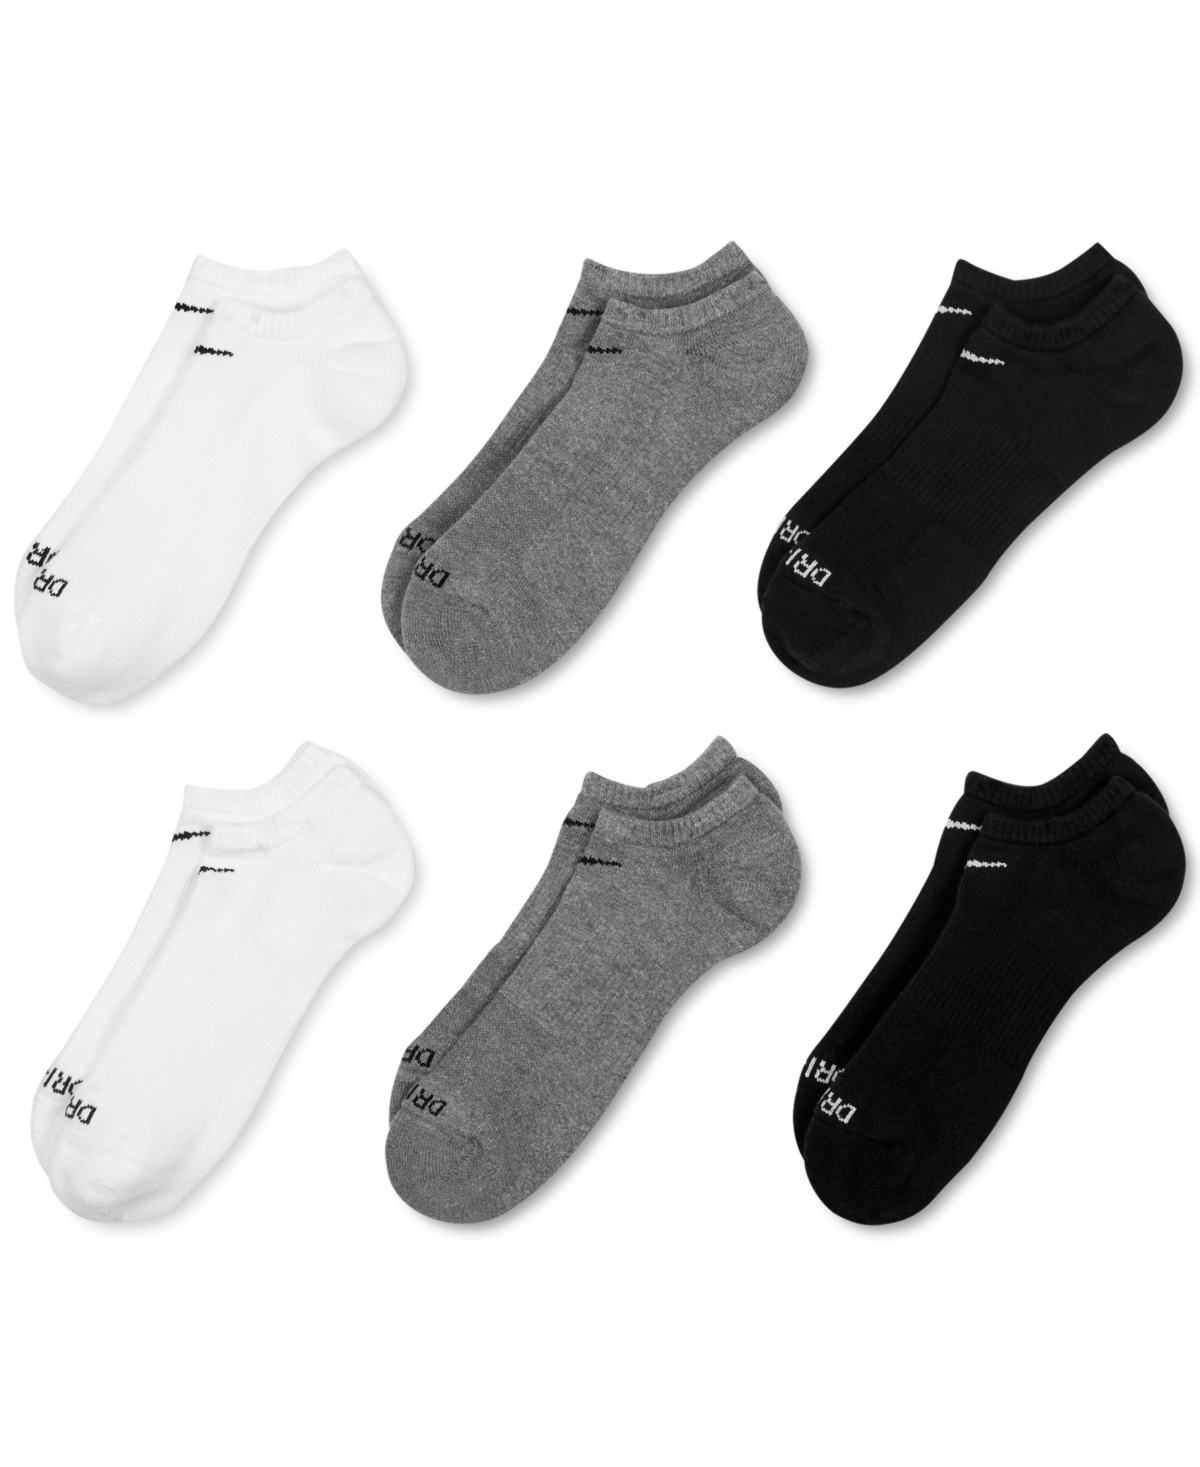 Nike Men's Everyday Plus Cushioned Training No-show Socks 6 Pairs In Multi